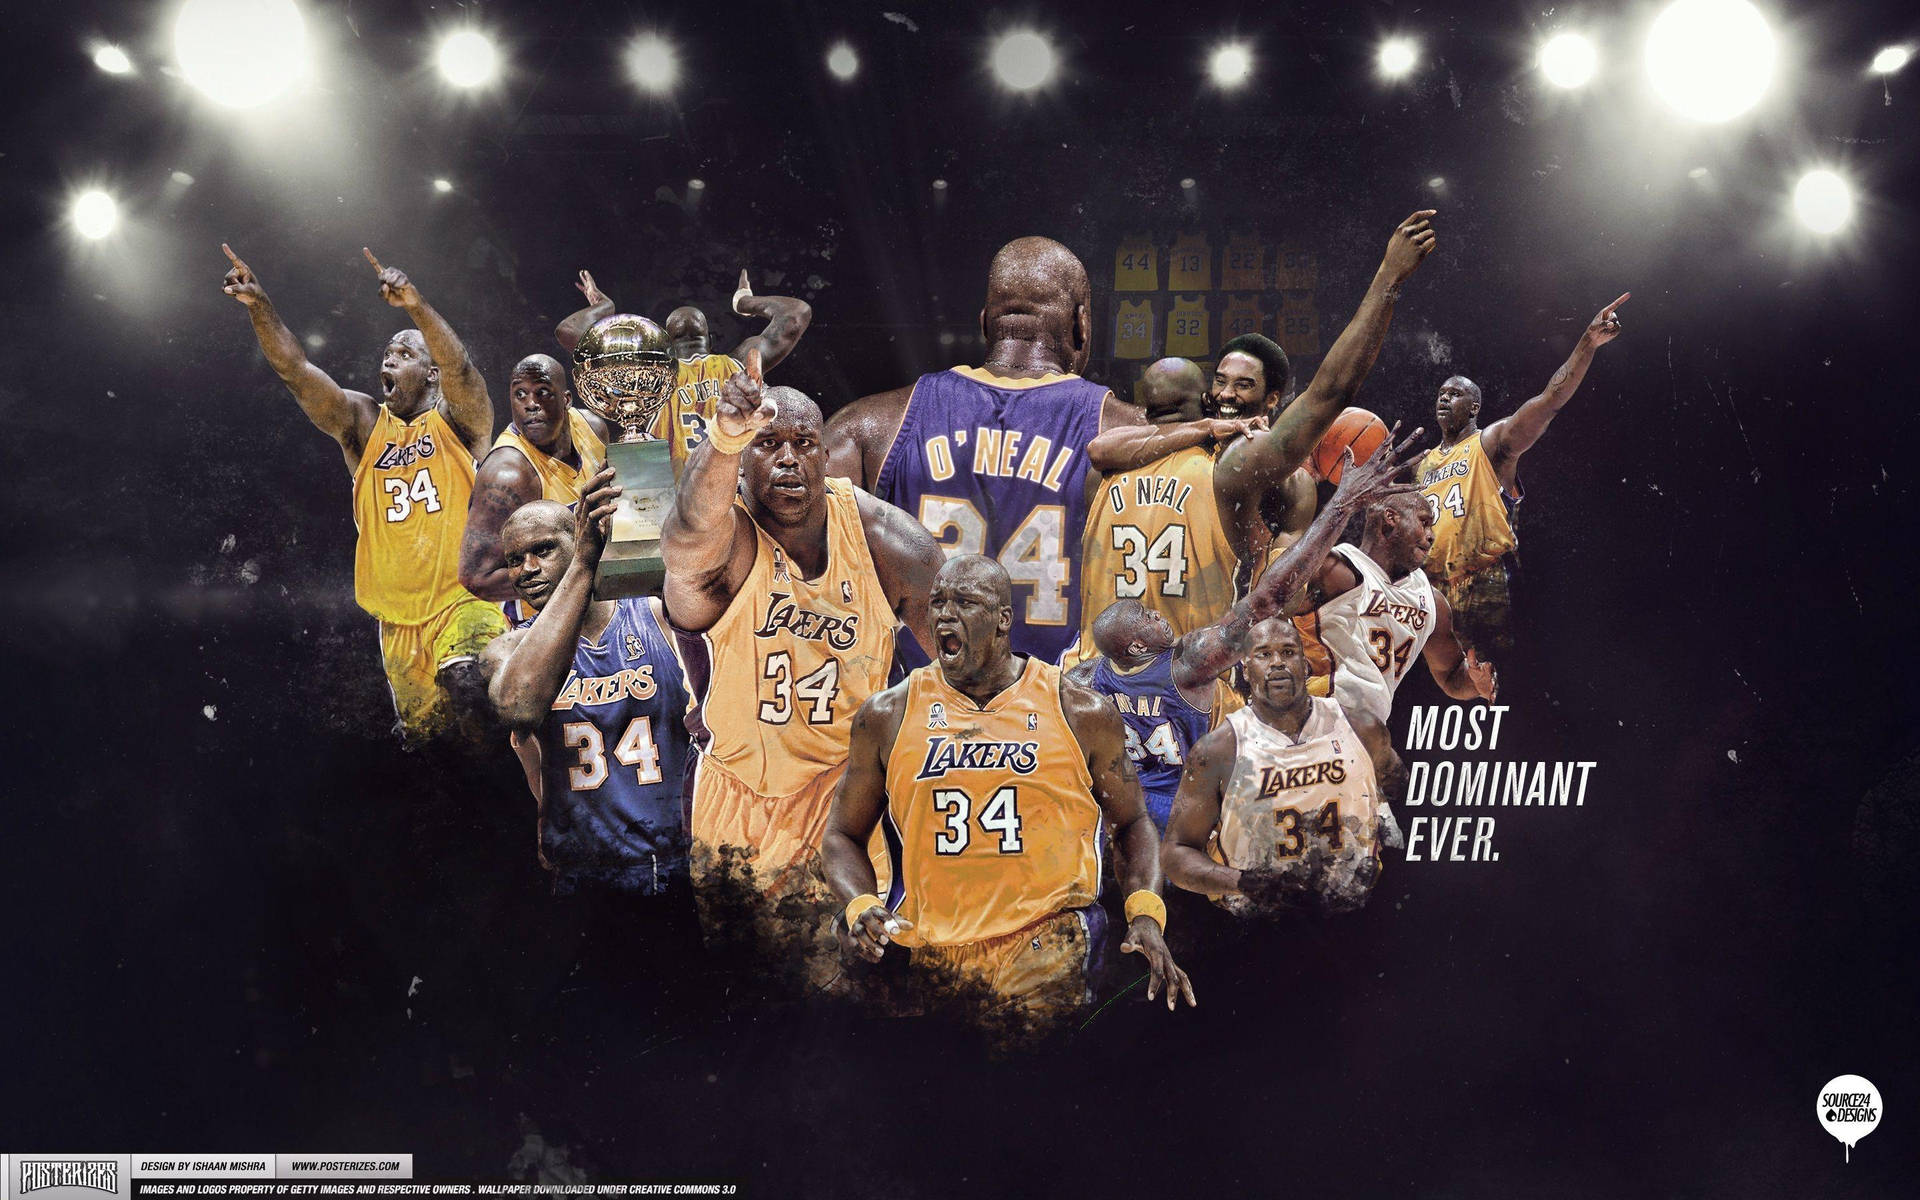 Shaquille O'neal La Lakers Background